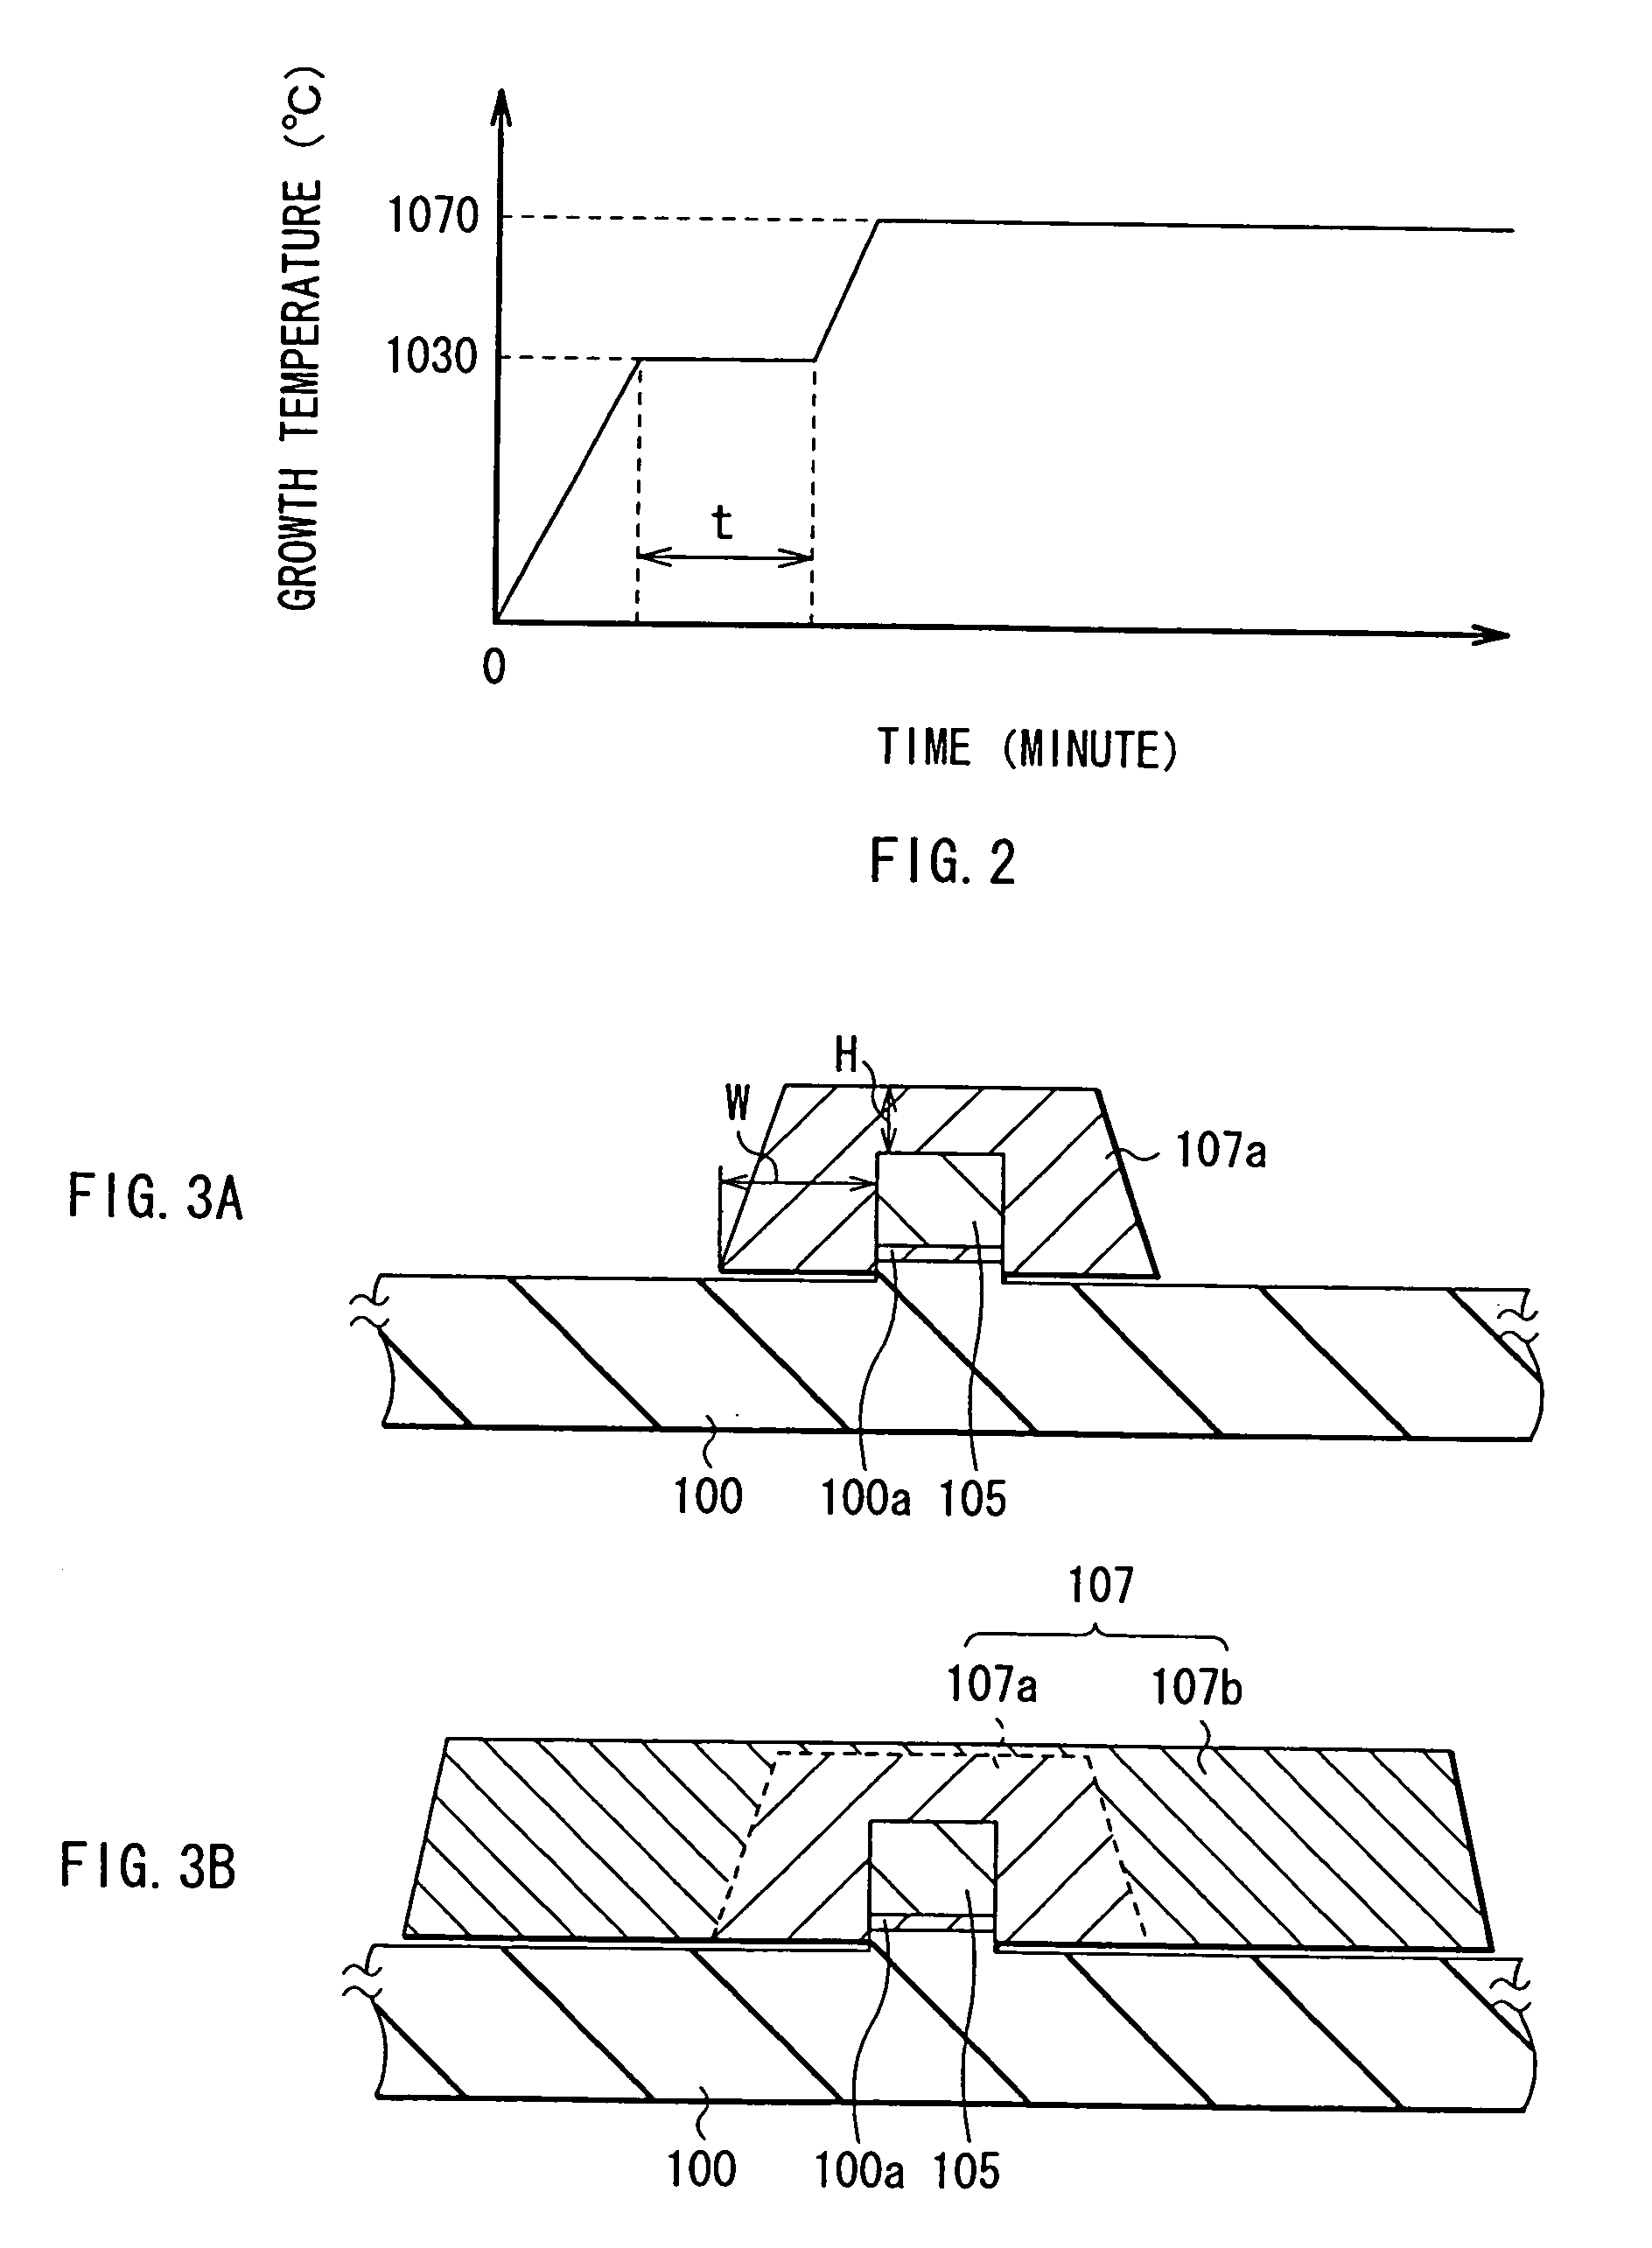 Nitride semiconductor, semiconductor device, and manufacturing methods for the same